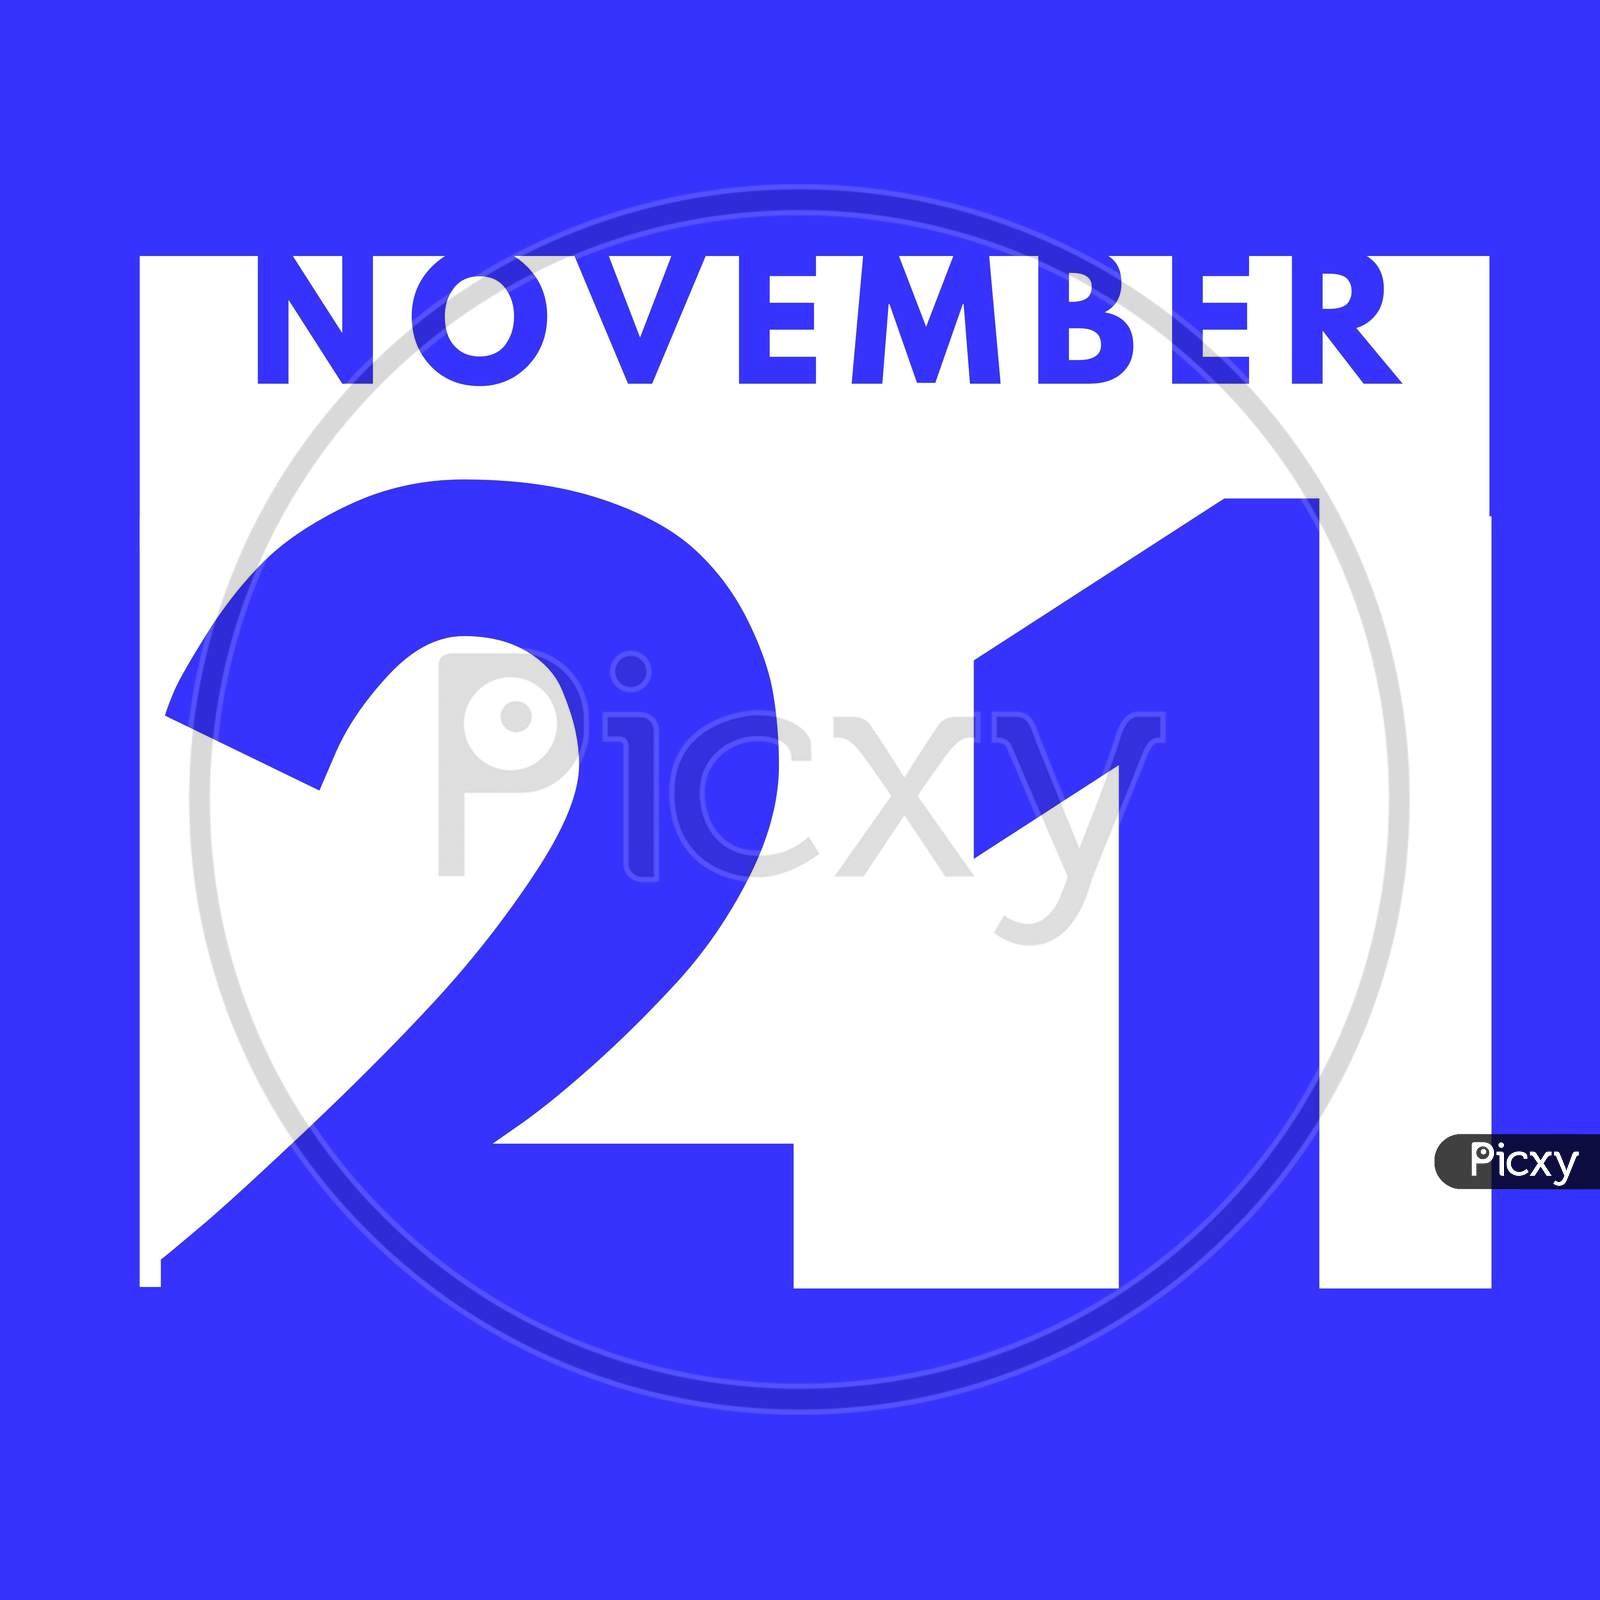 November 21 . Flat Modern Daily Calendar Icon .Date ,Day, Month .Calendar For The Month Of November